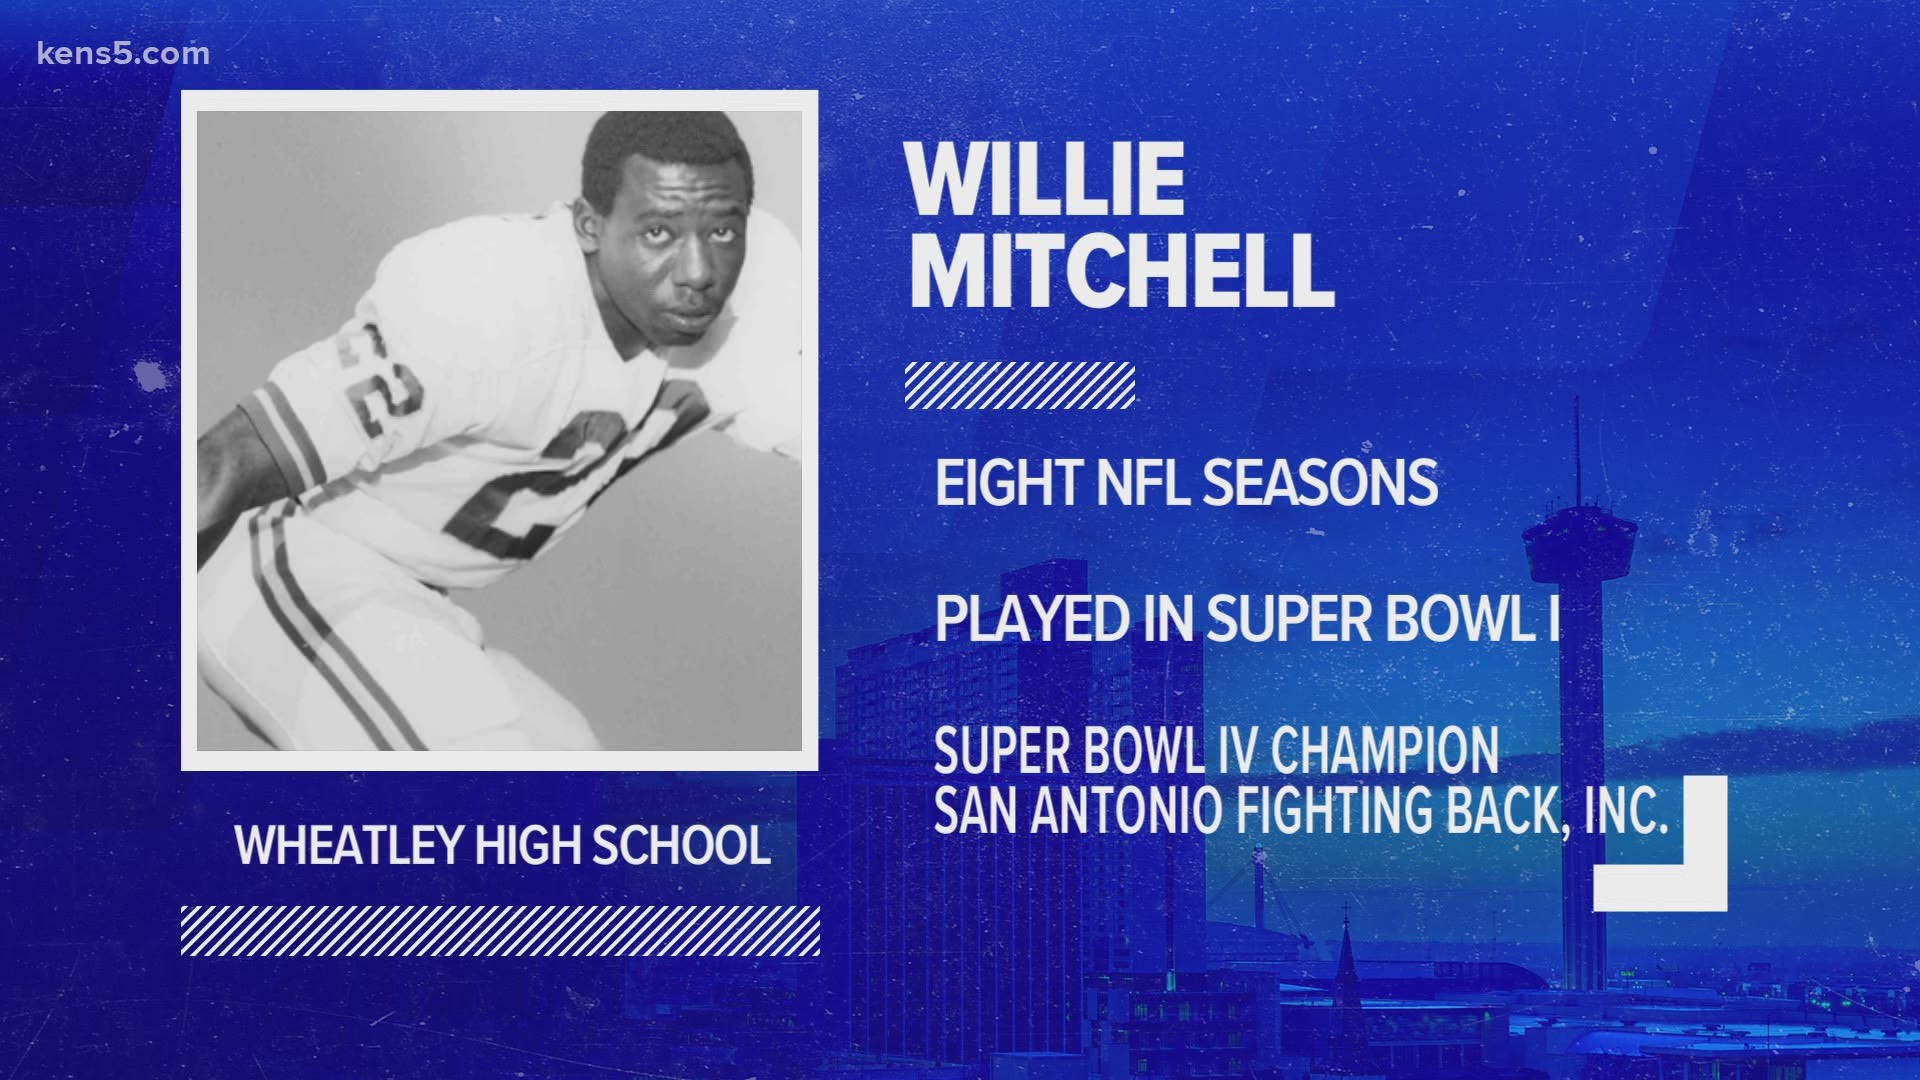 The Wheatley High School product played eight season in the NFL, spending most of that time with the Chiefs.